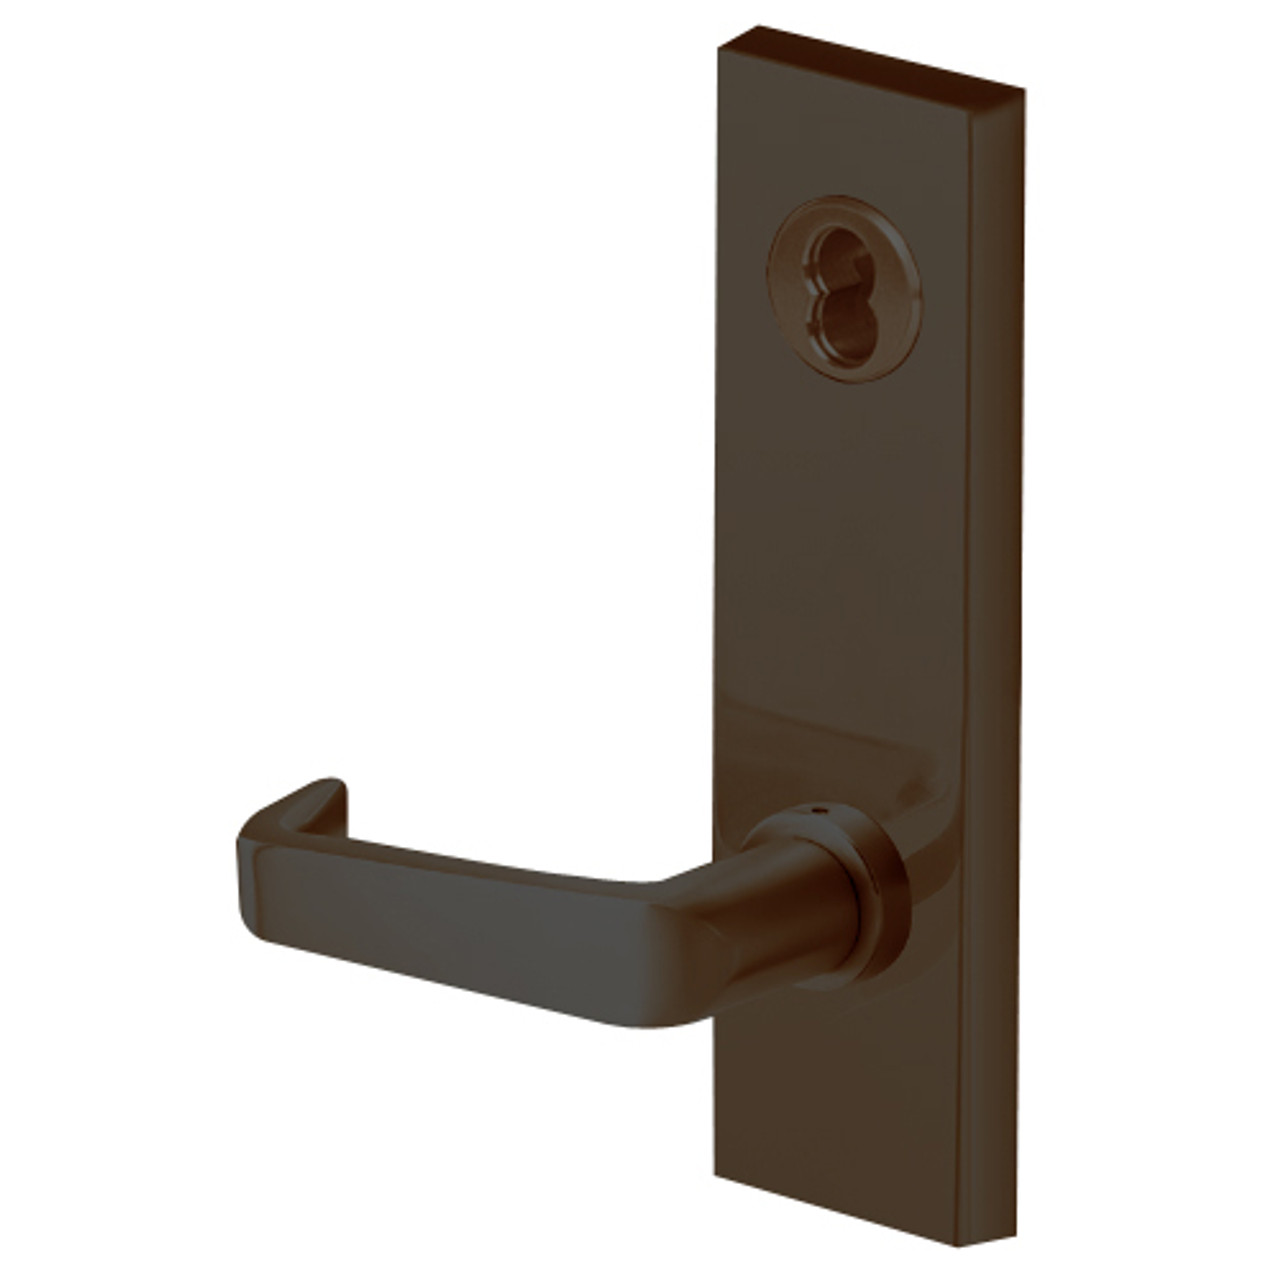 45HW7TWEL15M61312V Best 40HW series Double Key Deadbolt Fail Safe Electromechanical Mortise Lever Lock with Contour w/ Angle Return Style in Oil Rubbed Bronze